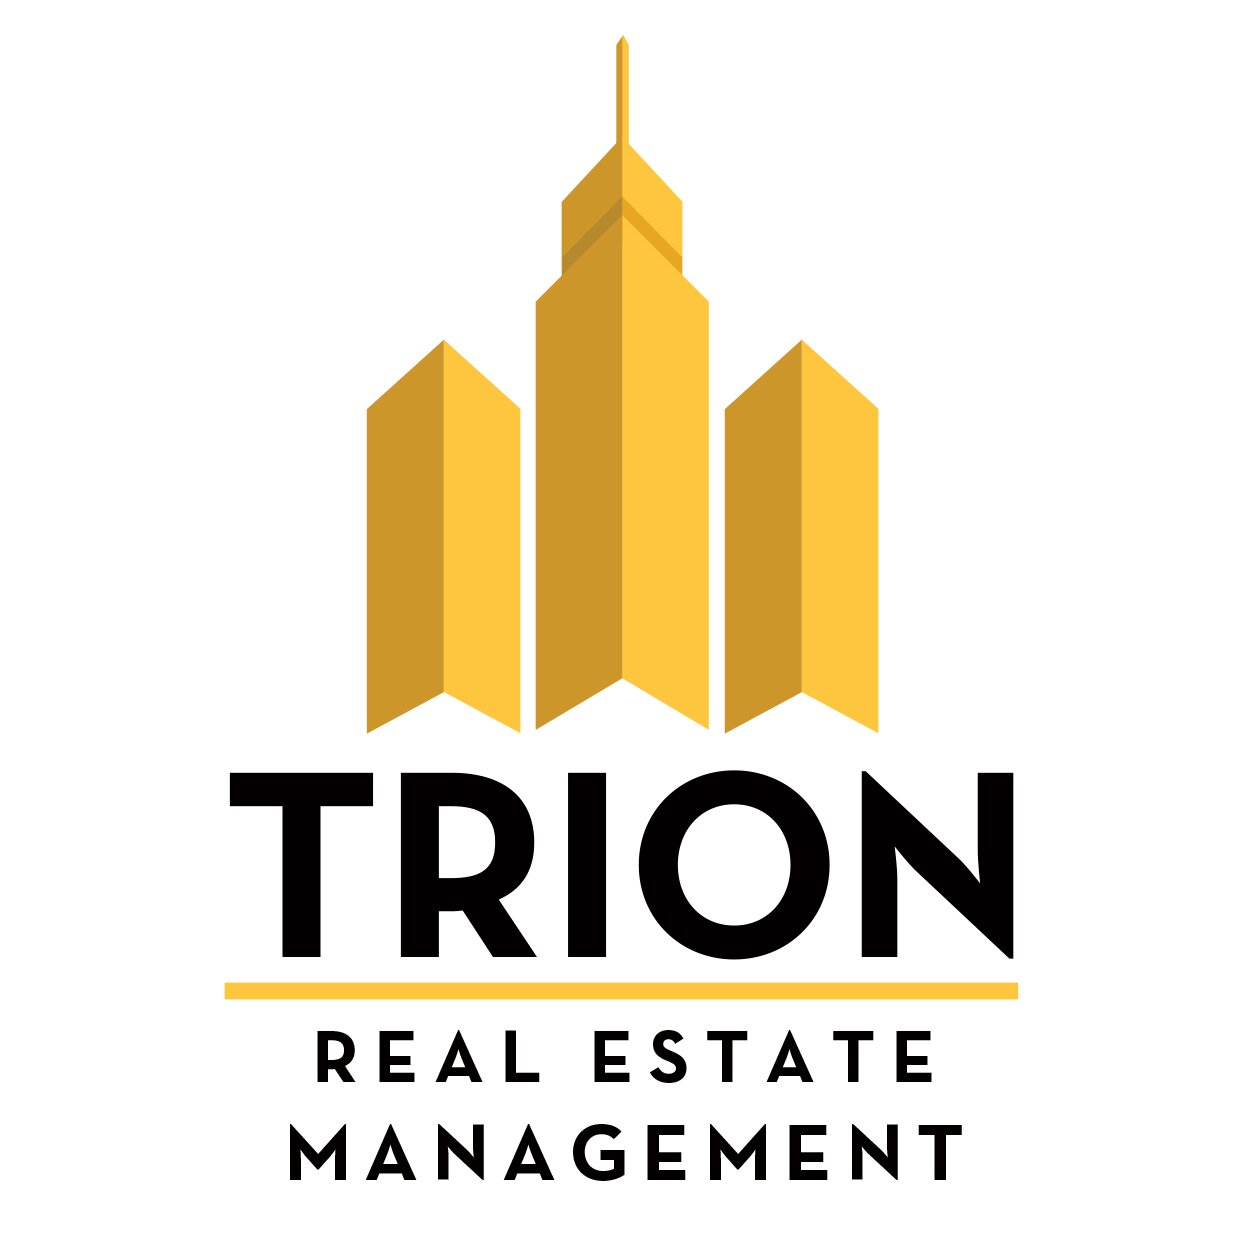 Trion Real Estate Management has offices in Yonkers and New York City.